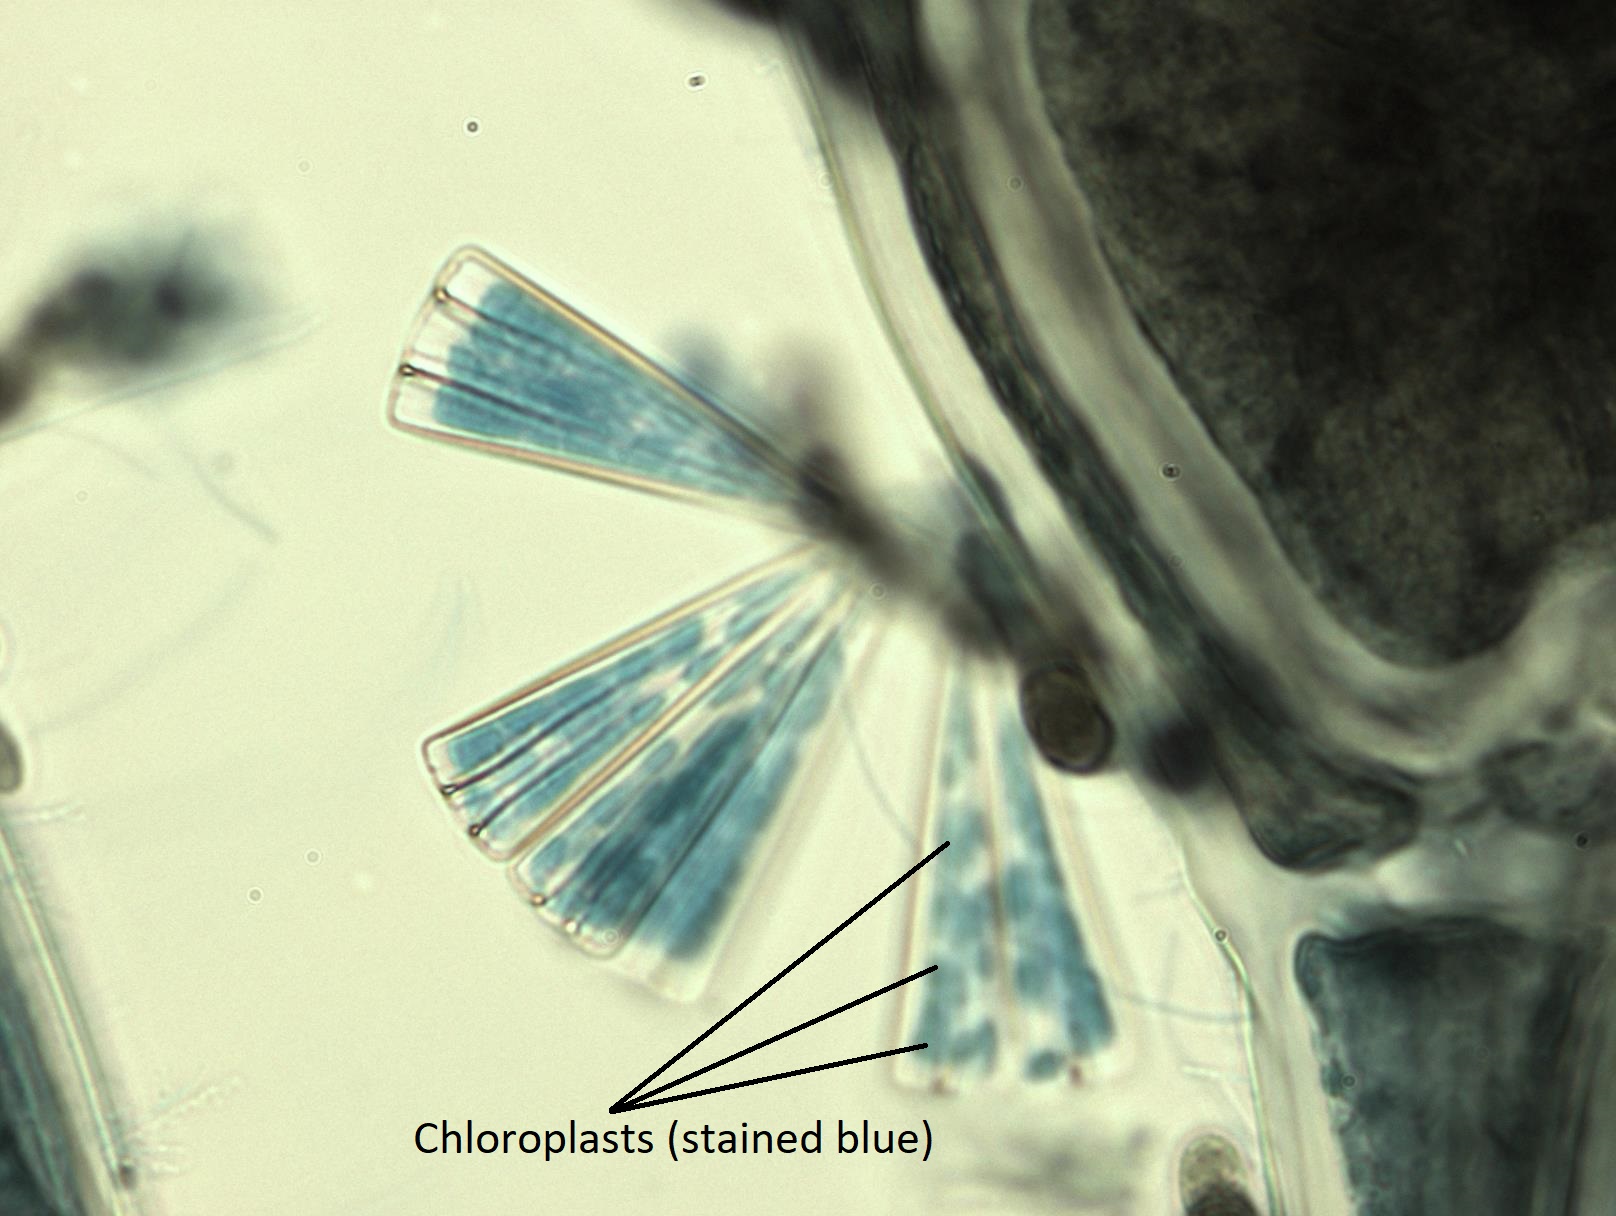 Epiphytic diatoms attached to a red algae. The chloroplasts are stained blue and indicated in the picture.